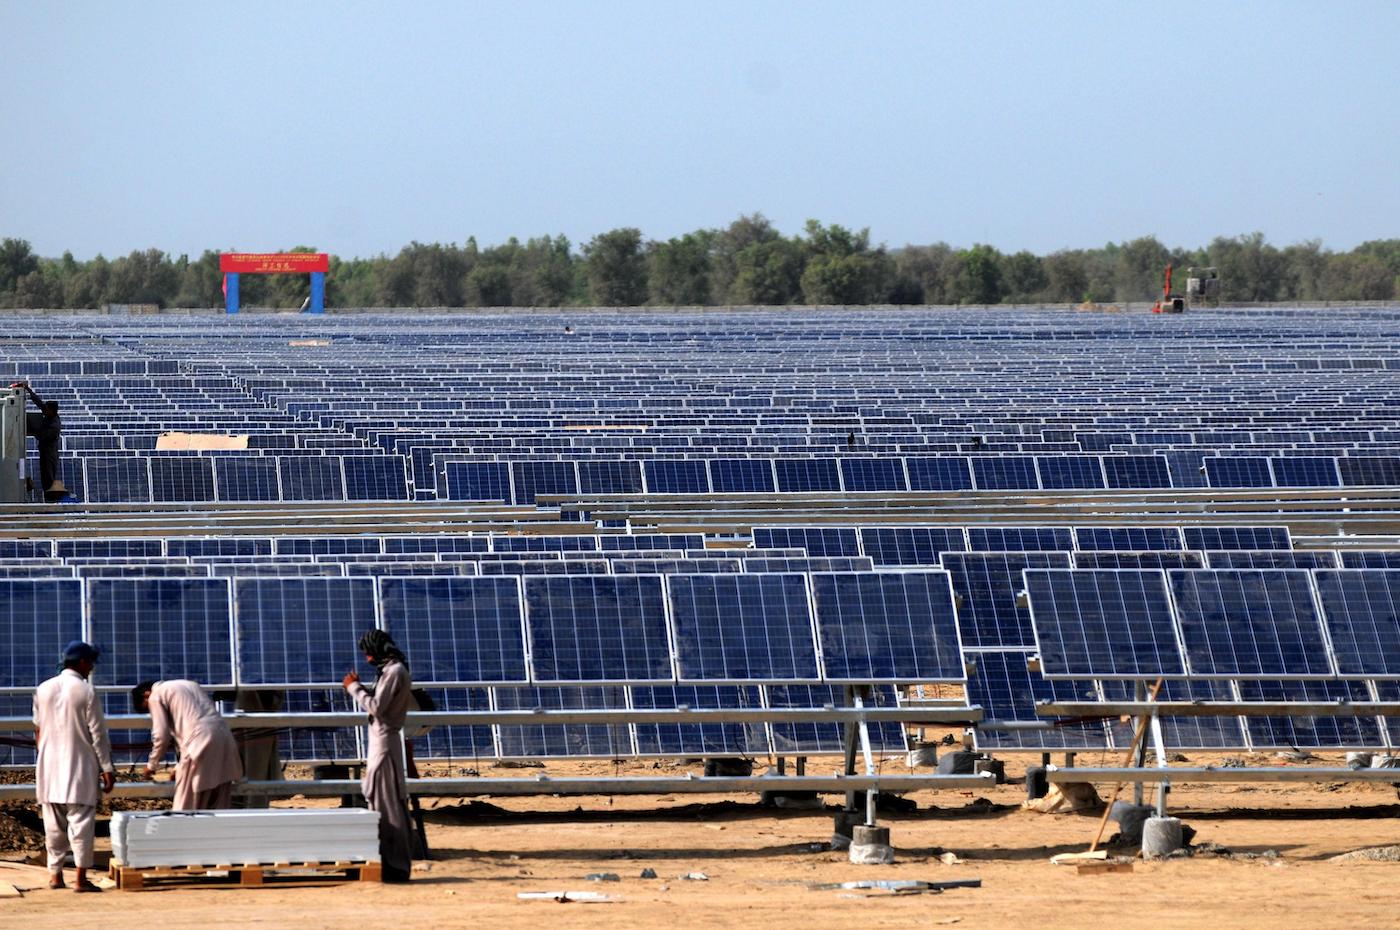 Solar panels are installed for the Zonergy 900 MW project in Bahawalpur, Pakistan, in 2015